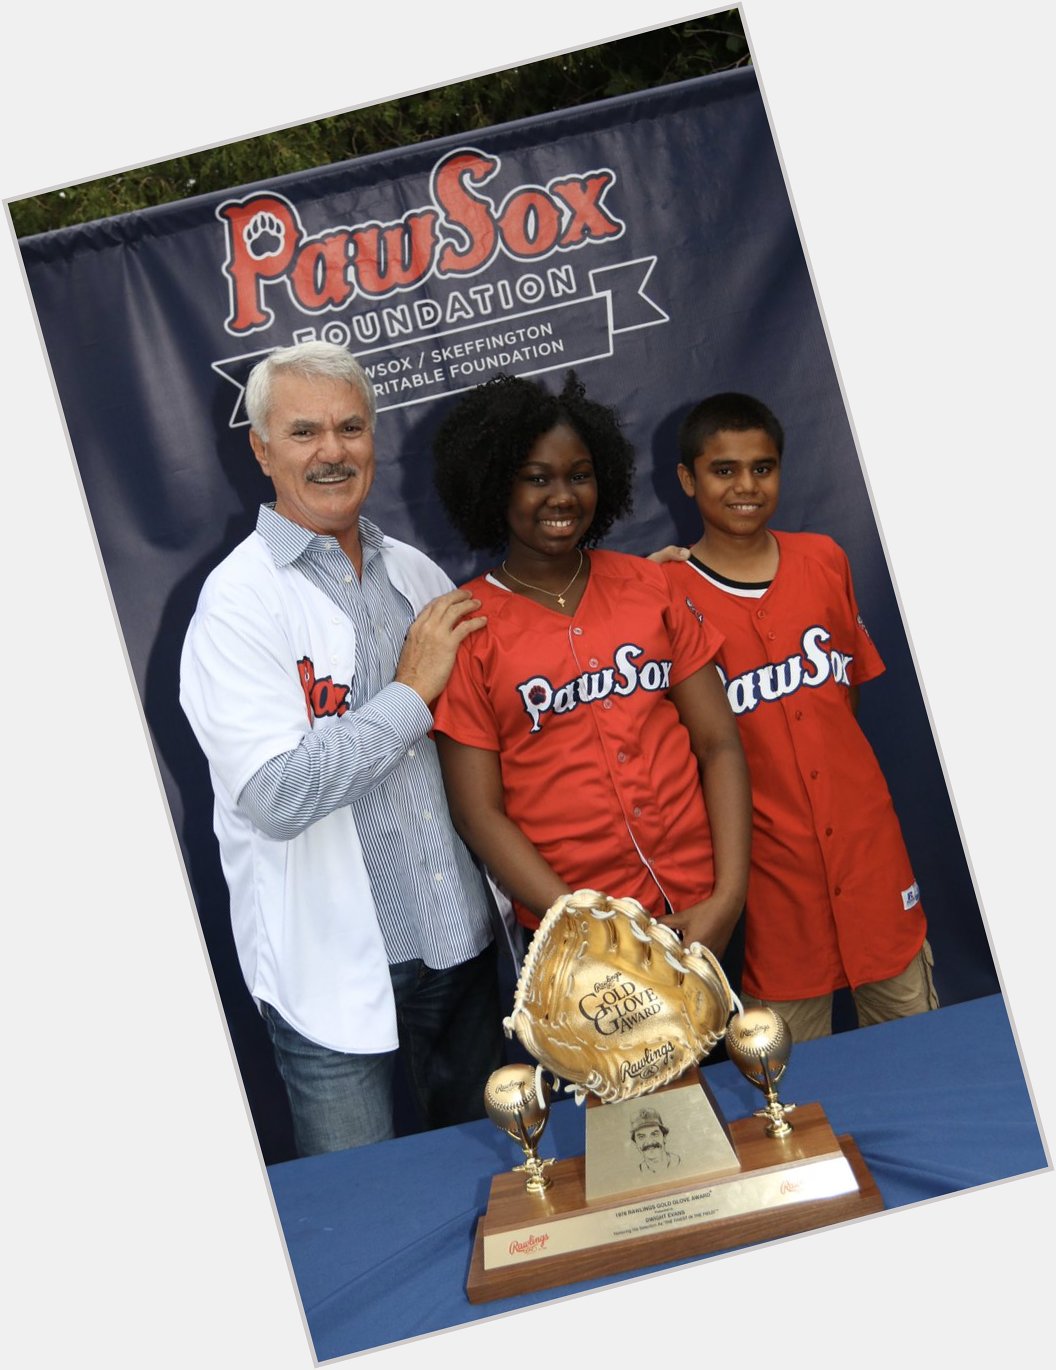 Happy Birthday to Hall of Famer and longtime friend of the PawSox, Dwight Evans!  